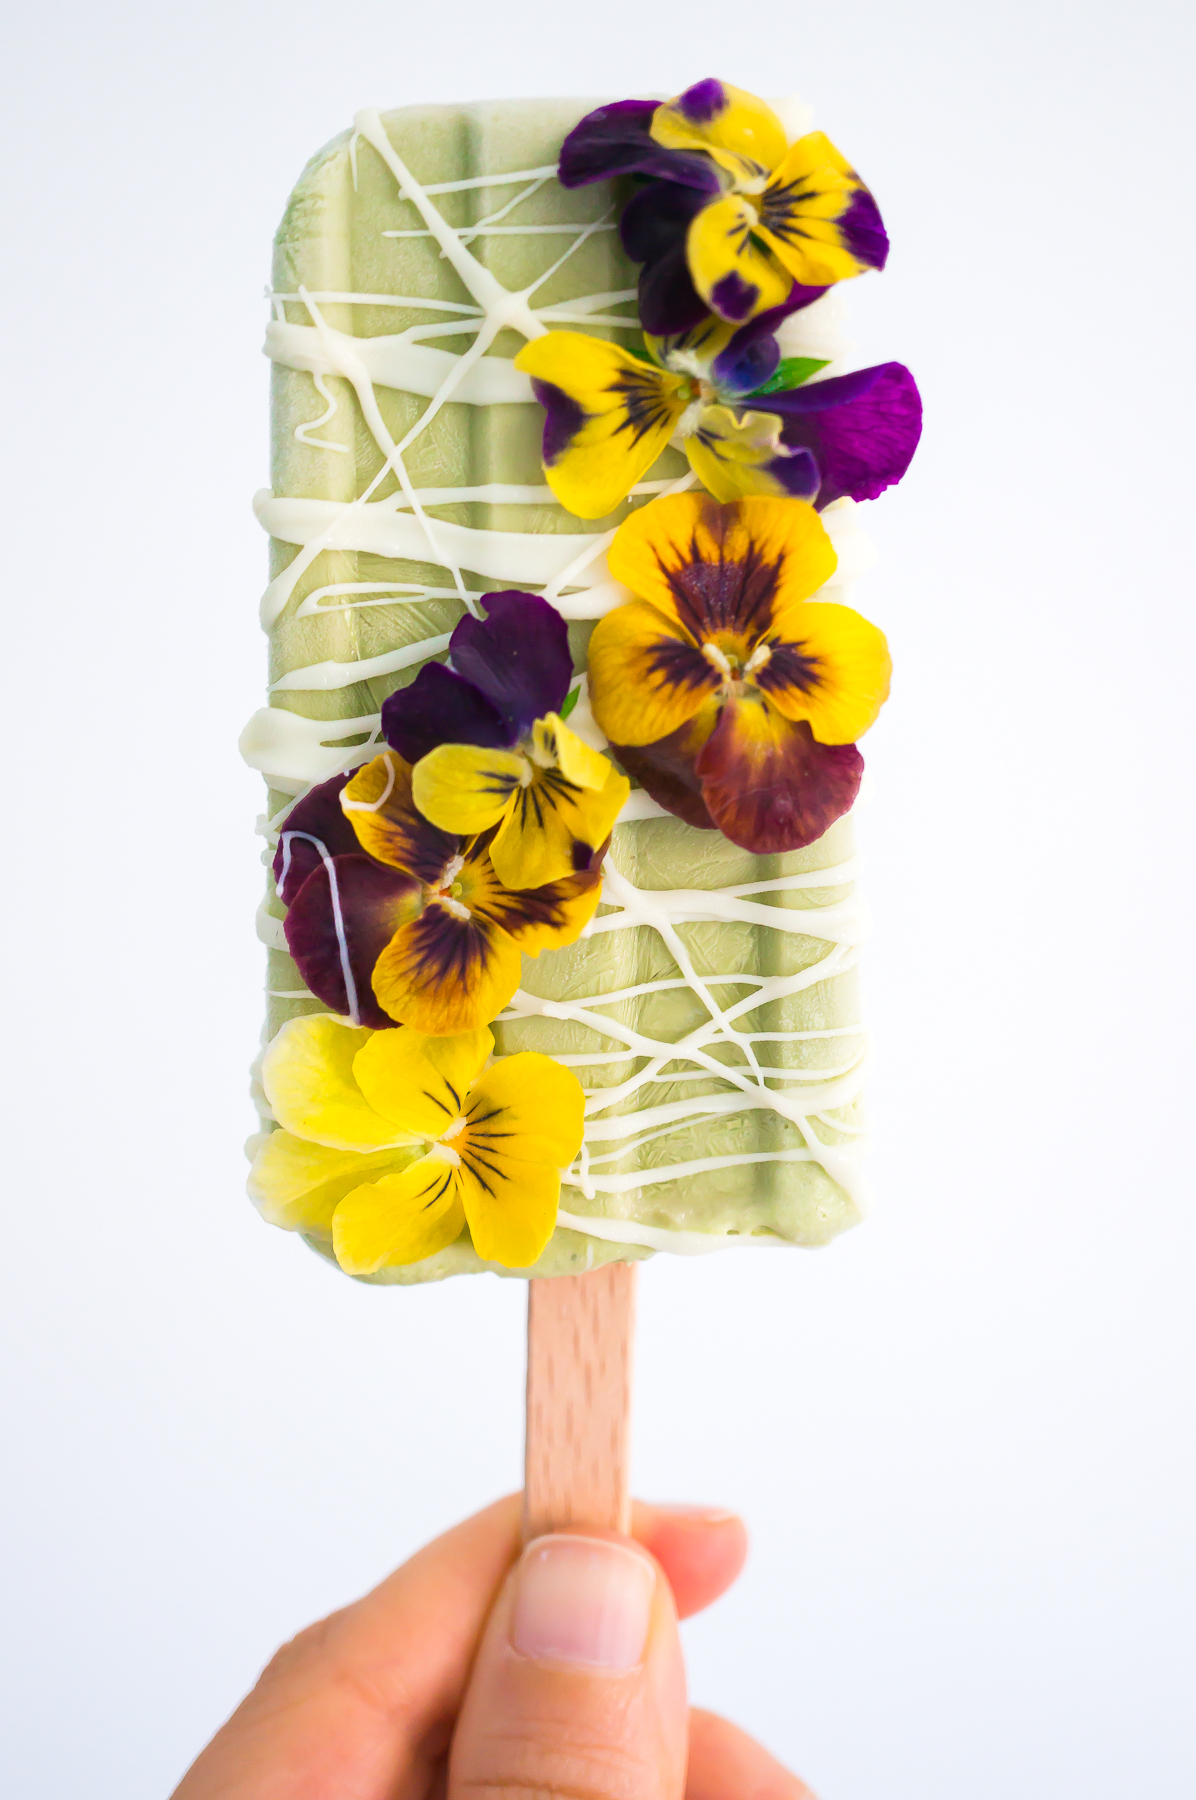 Basil popsicle with white chocolate and edible flowers